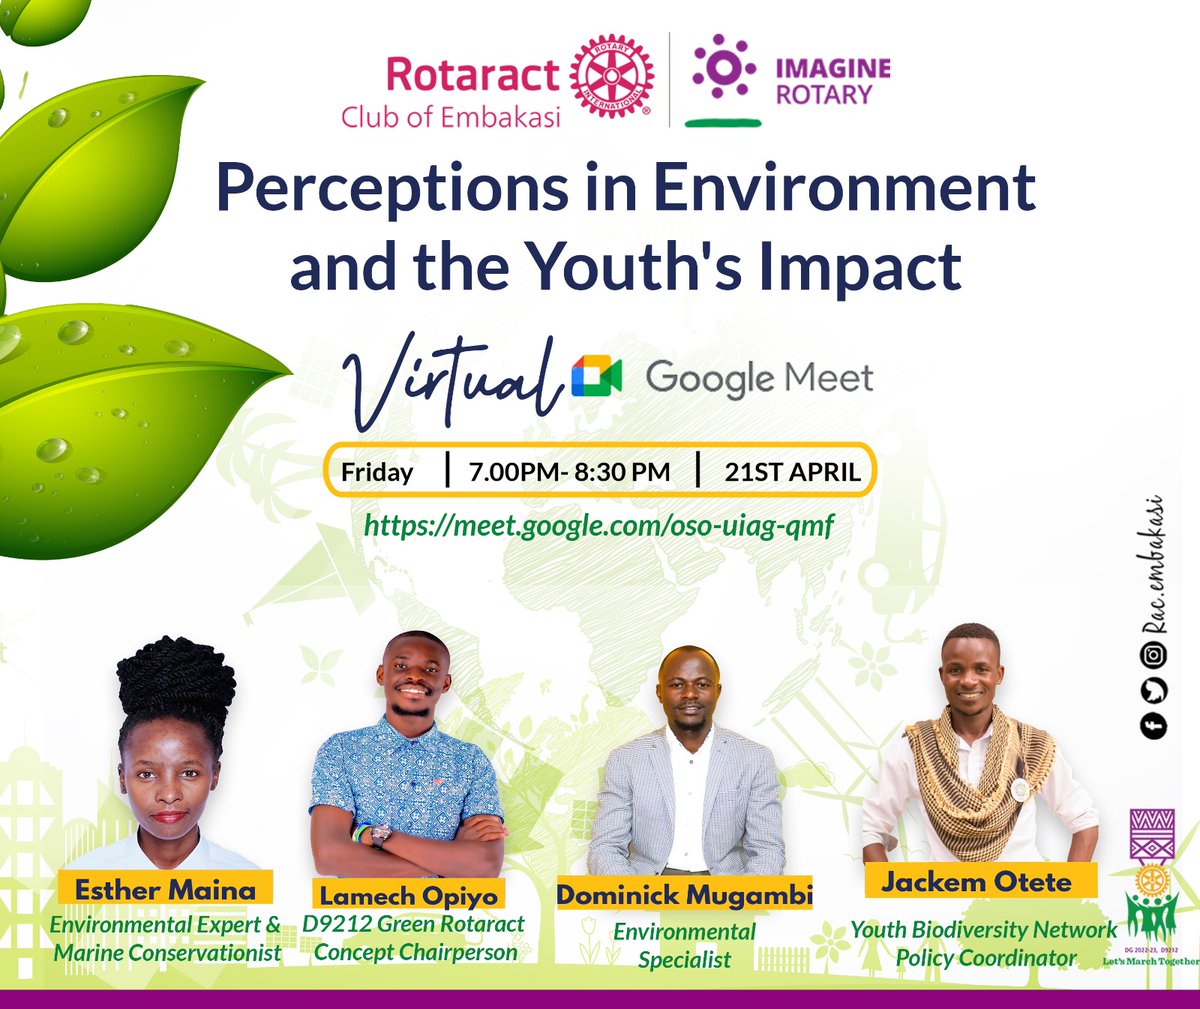 You don't want to miss this eco-awesome panel discussion on Friday, April 21st! 🌱👀 #YouthImpact #EcoPerceptions #VirtualPanel  #Imaginerotary #letsmarchtogether #MengiMakuu
@rac_simbarota
@rotaract_club_athiriver